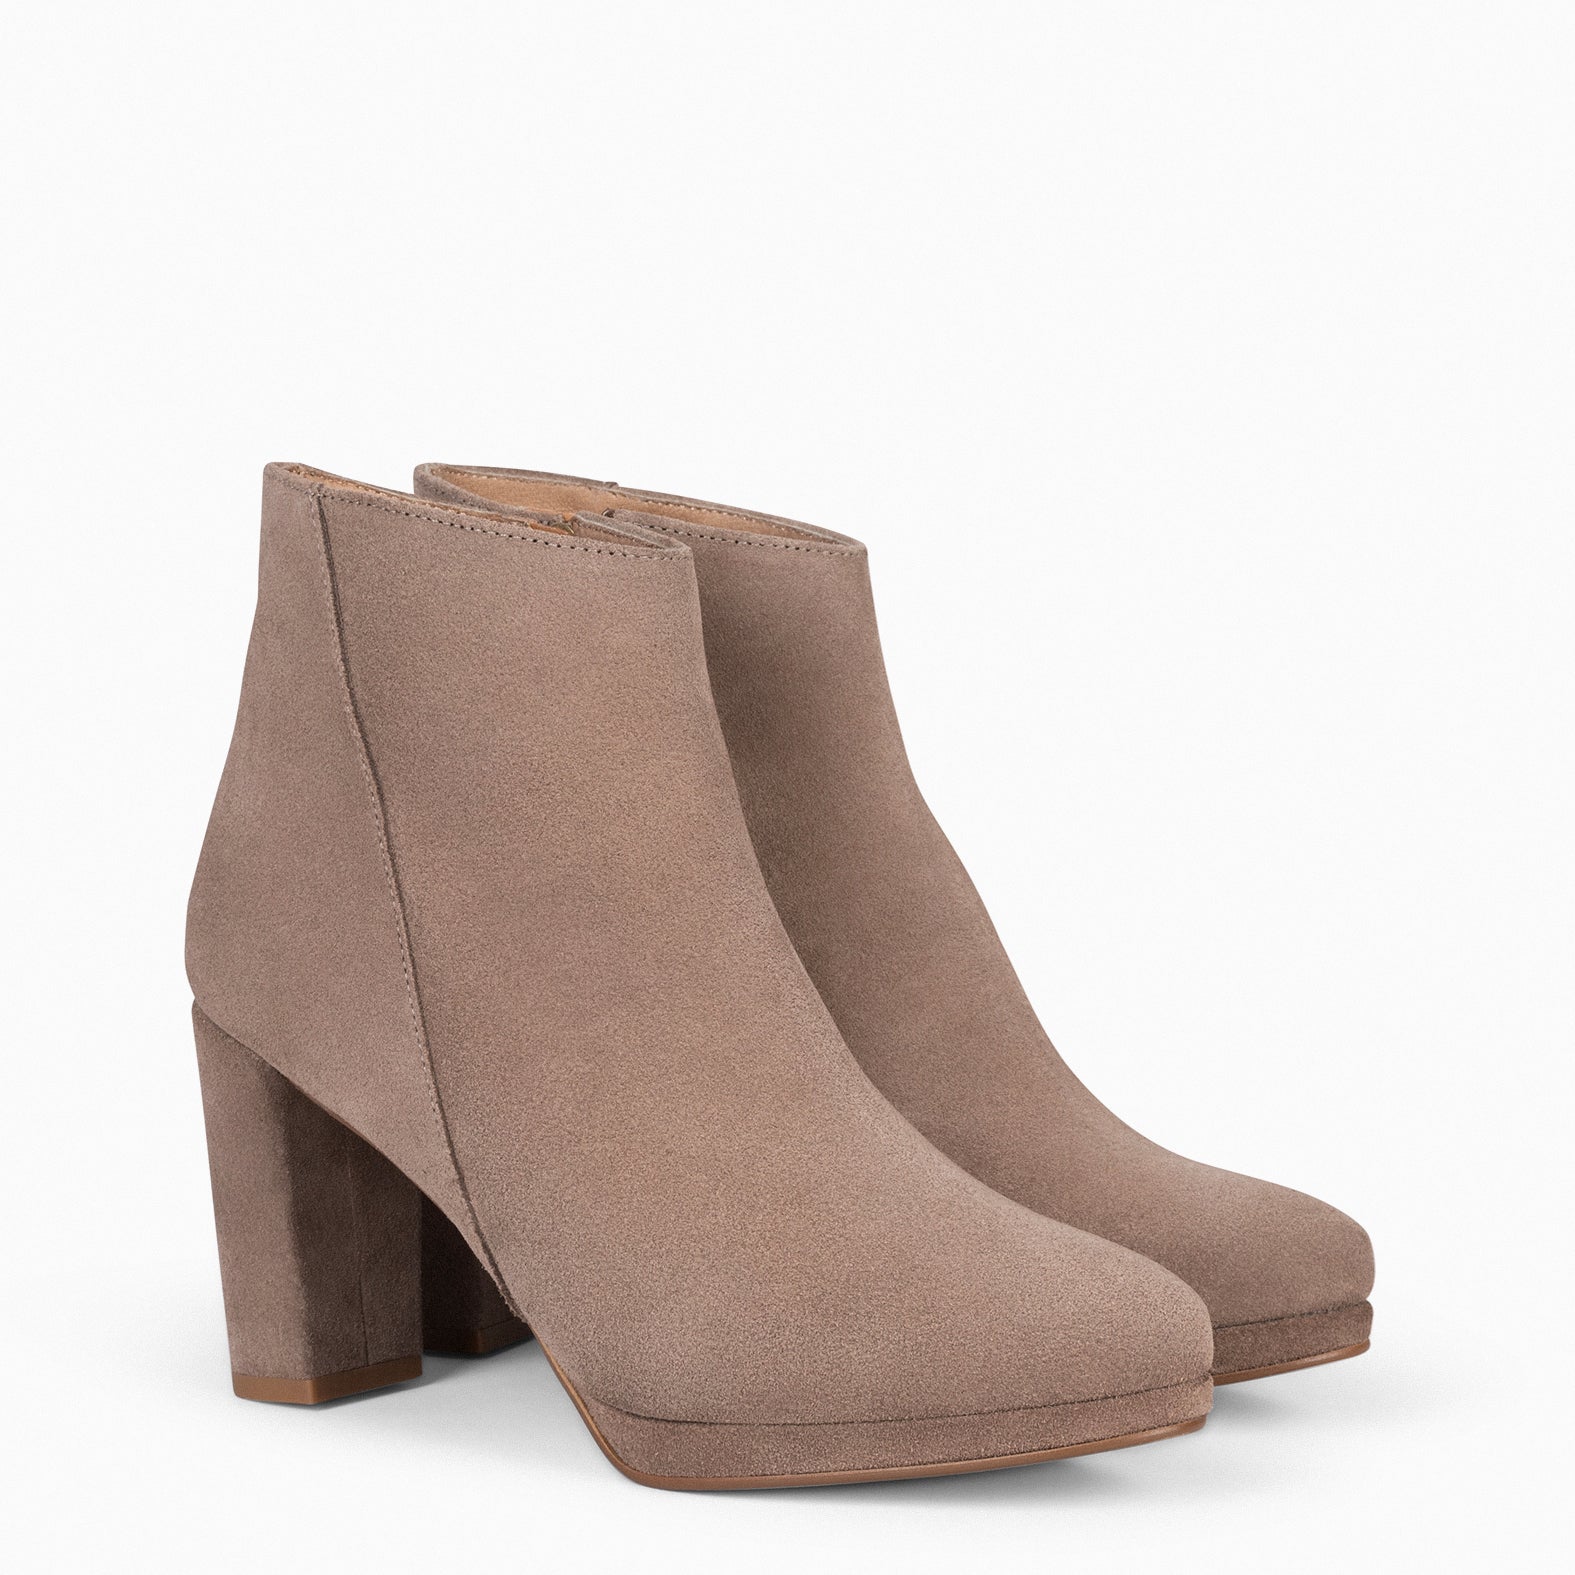 WITTEN - TAUPE booties with platform